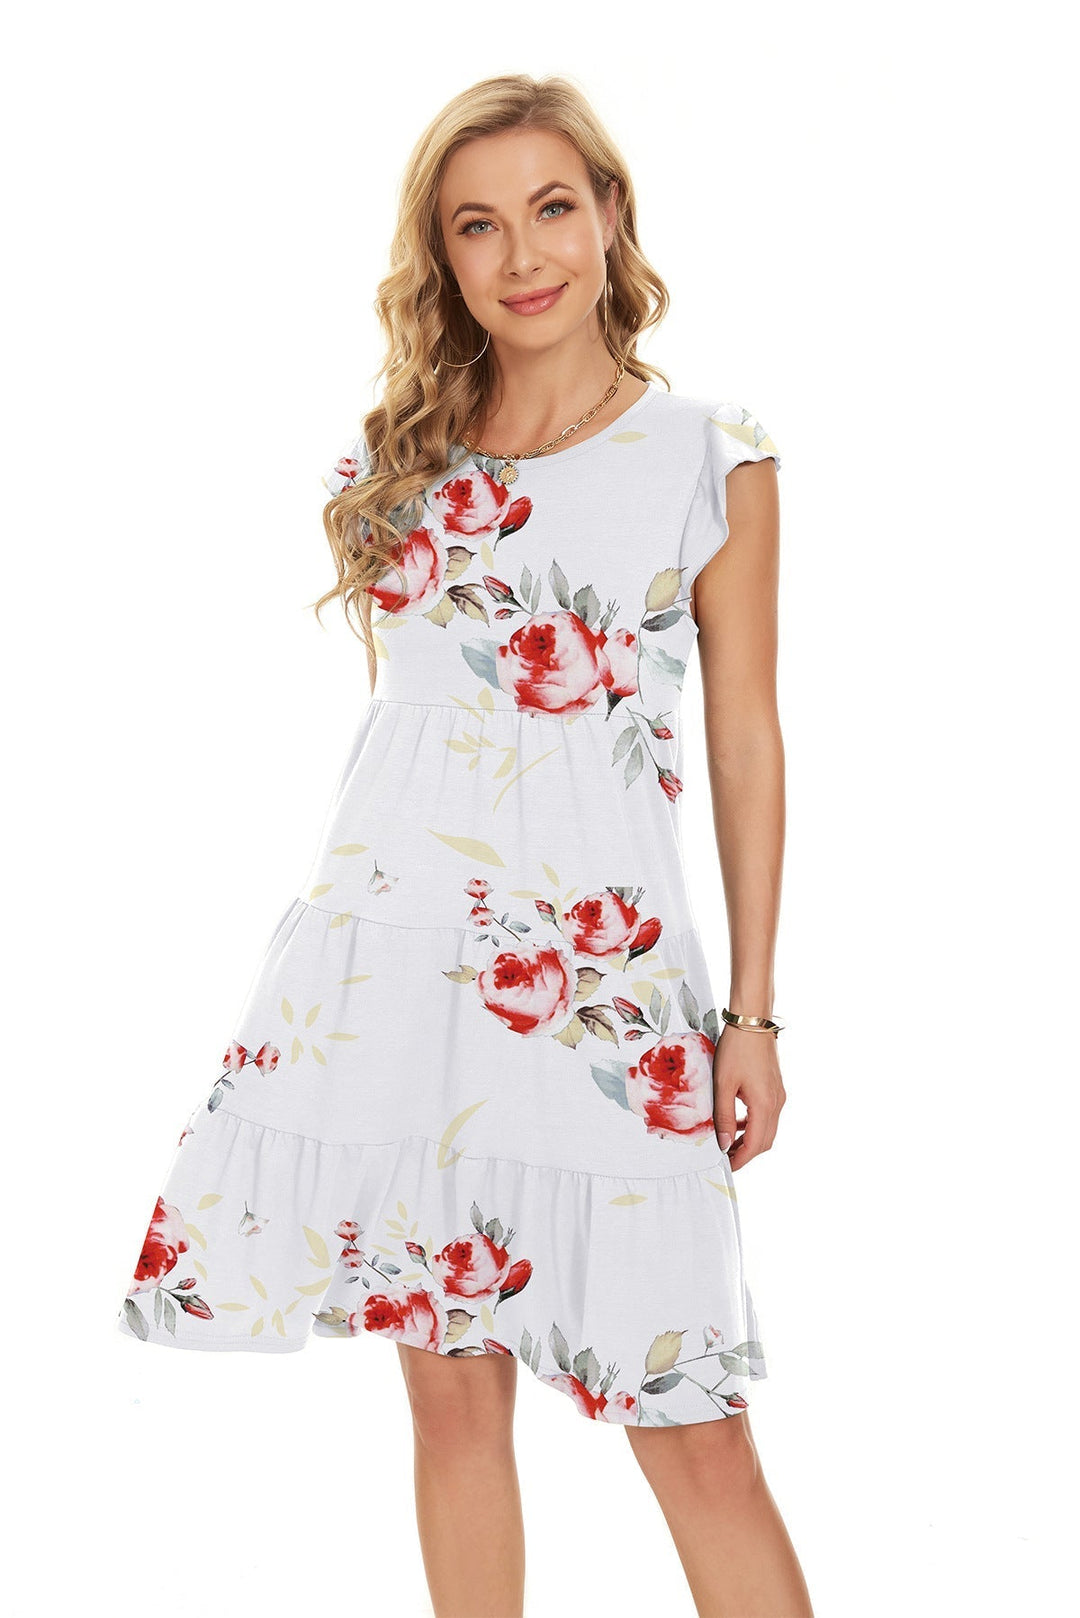 Elegant Short Sleeves Ruffle Tiered Silhouette Dresses in Plus Sizes Gen U Us Products